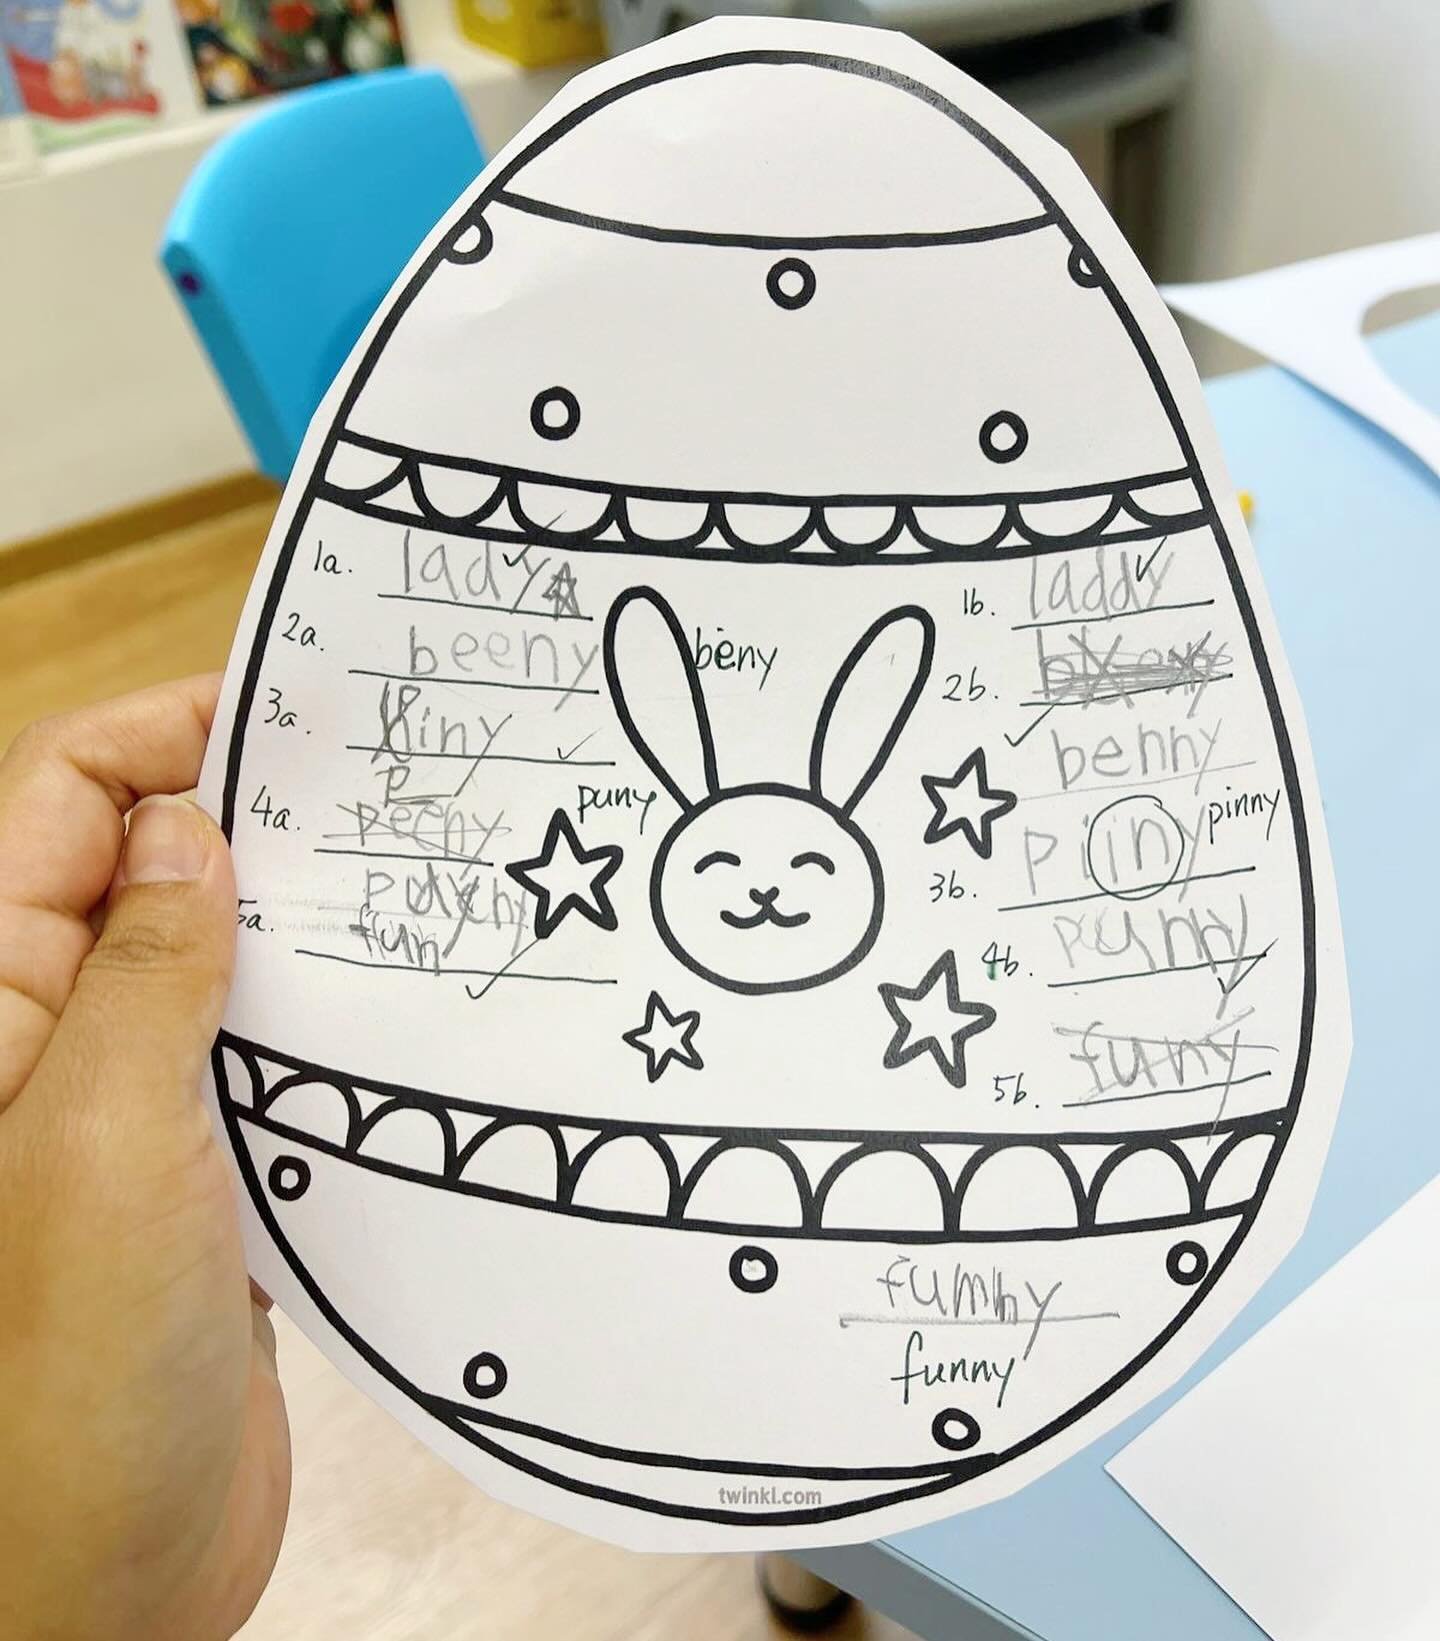 How have your Easter holidays gone? Our students became egg-straordinary spellers! 🐣🪺

#literacy #literacyclasses #literacyforkids #phonicsforkids #hongkongclasses #hongkongkids #hongkongparents #hongkongmoms #hongkongmomslife #readingright #readin